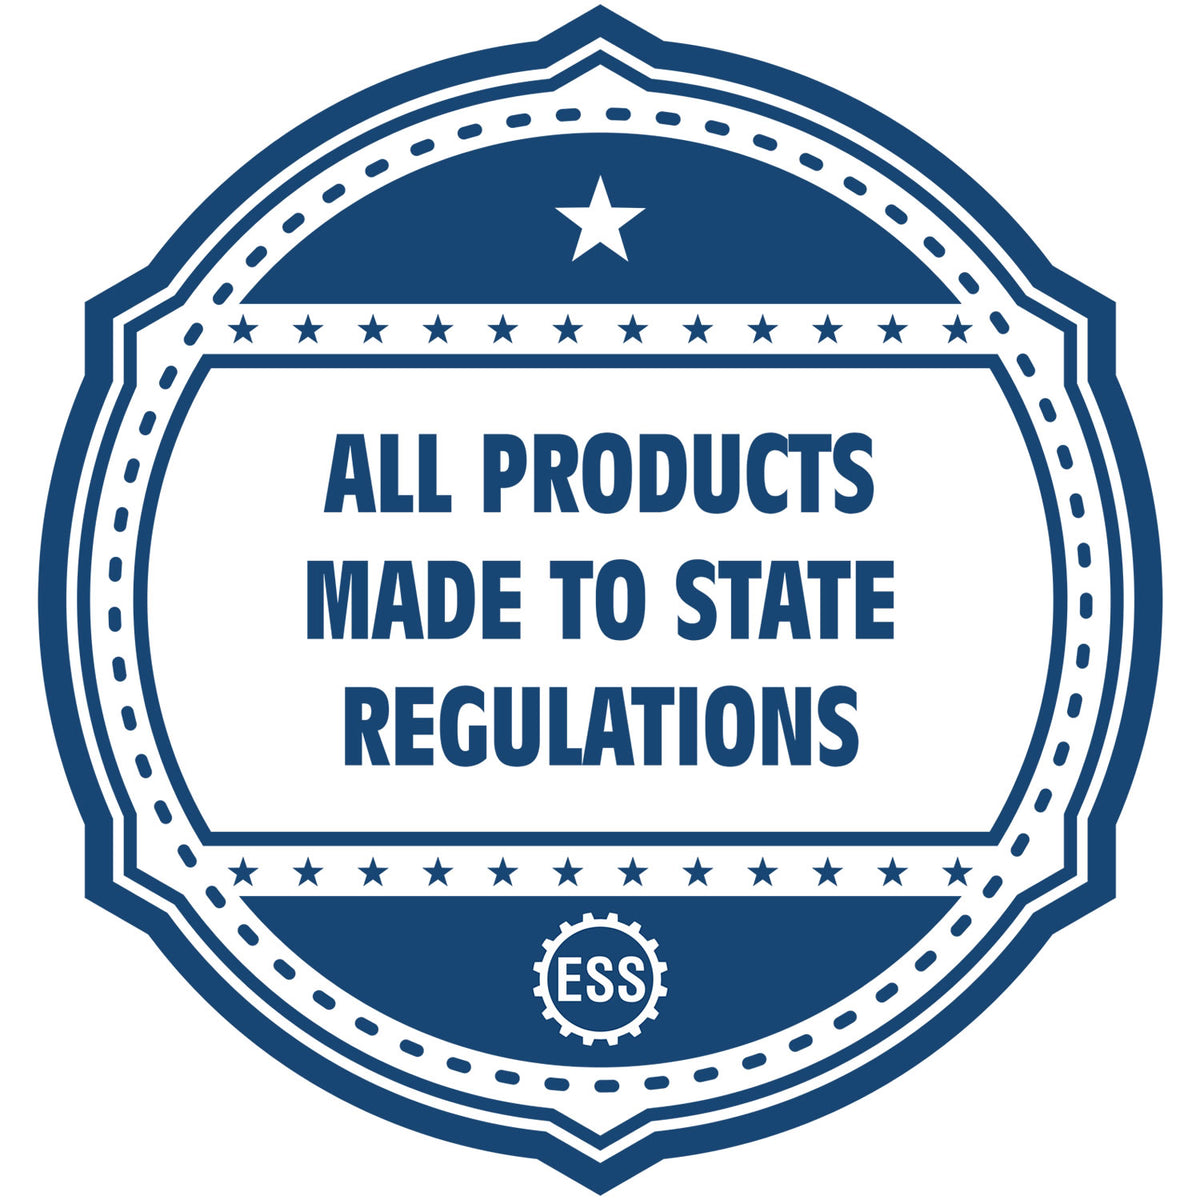 An icon or badge element for the Maine Professional Engineer Seal Stamp showing that this product is made in compliance with state regulations.